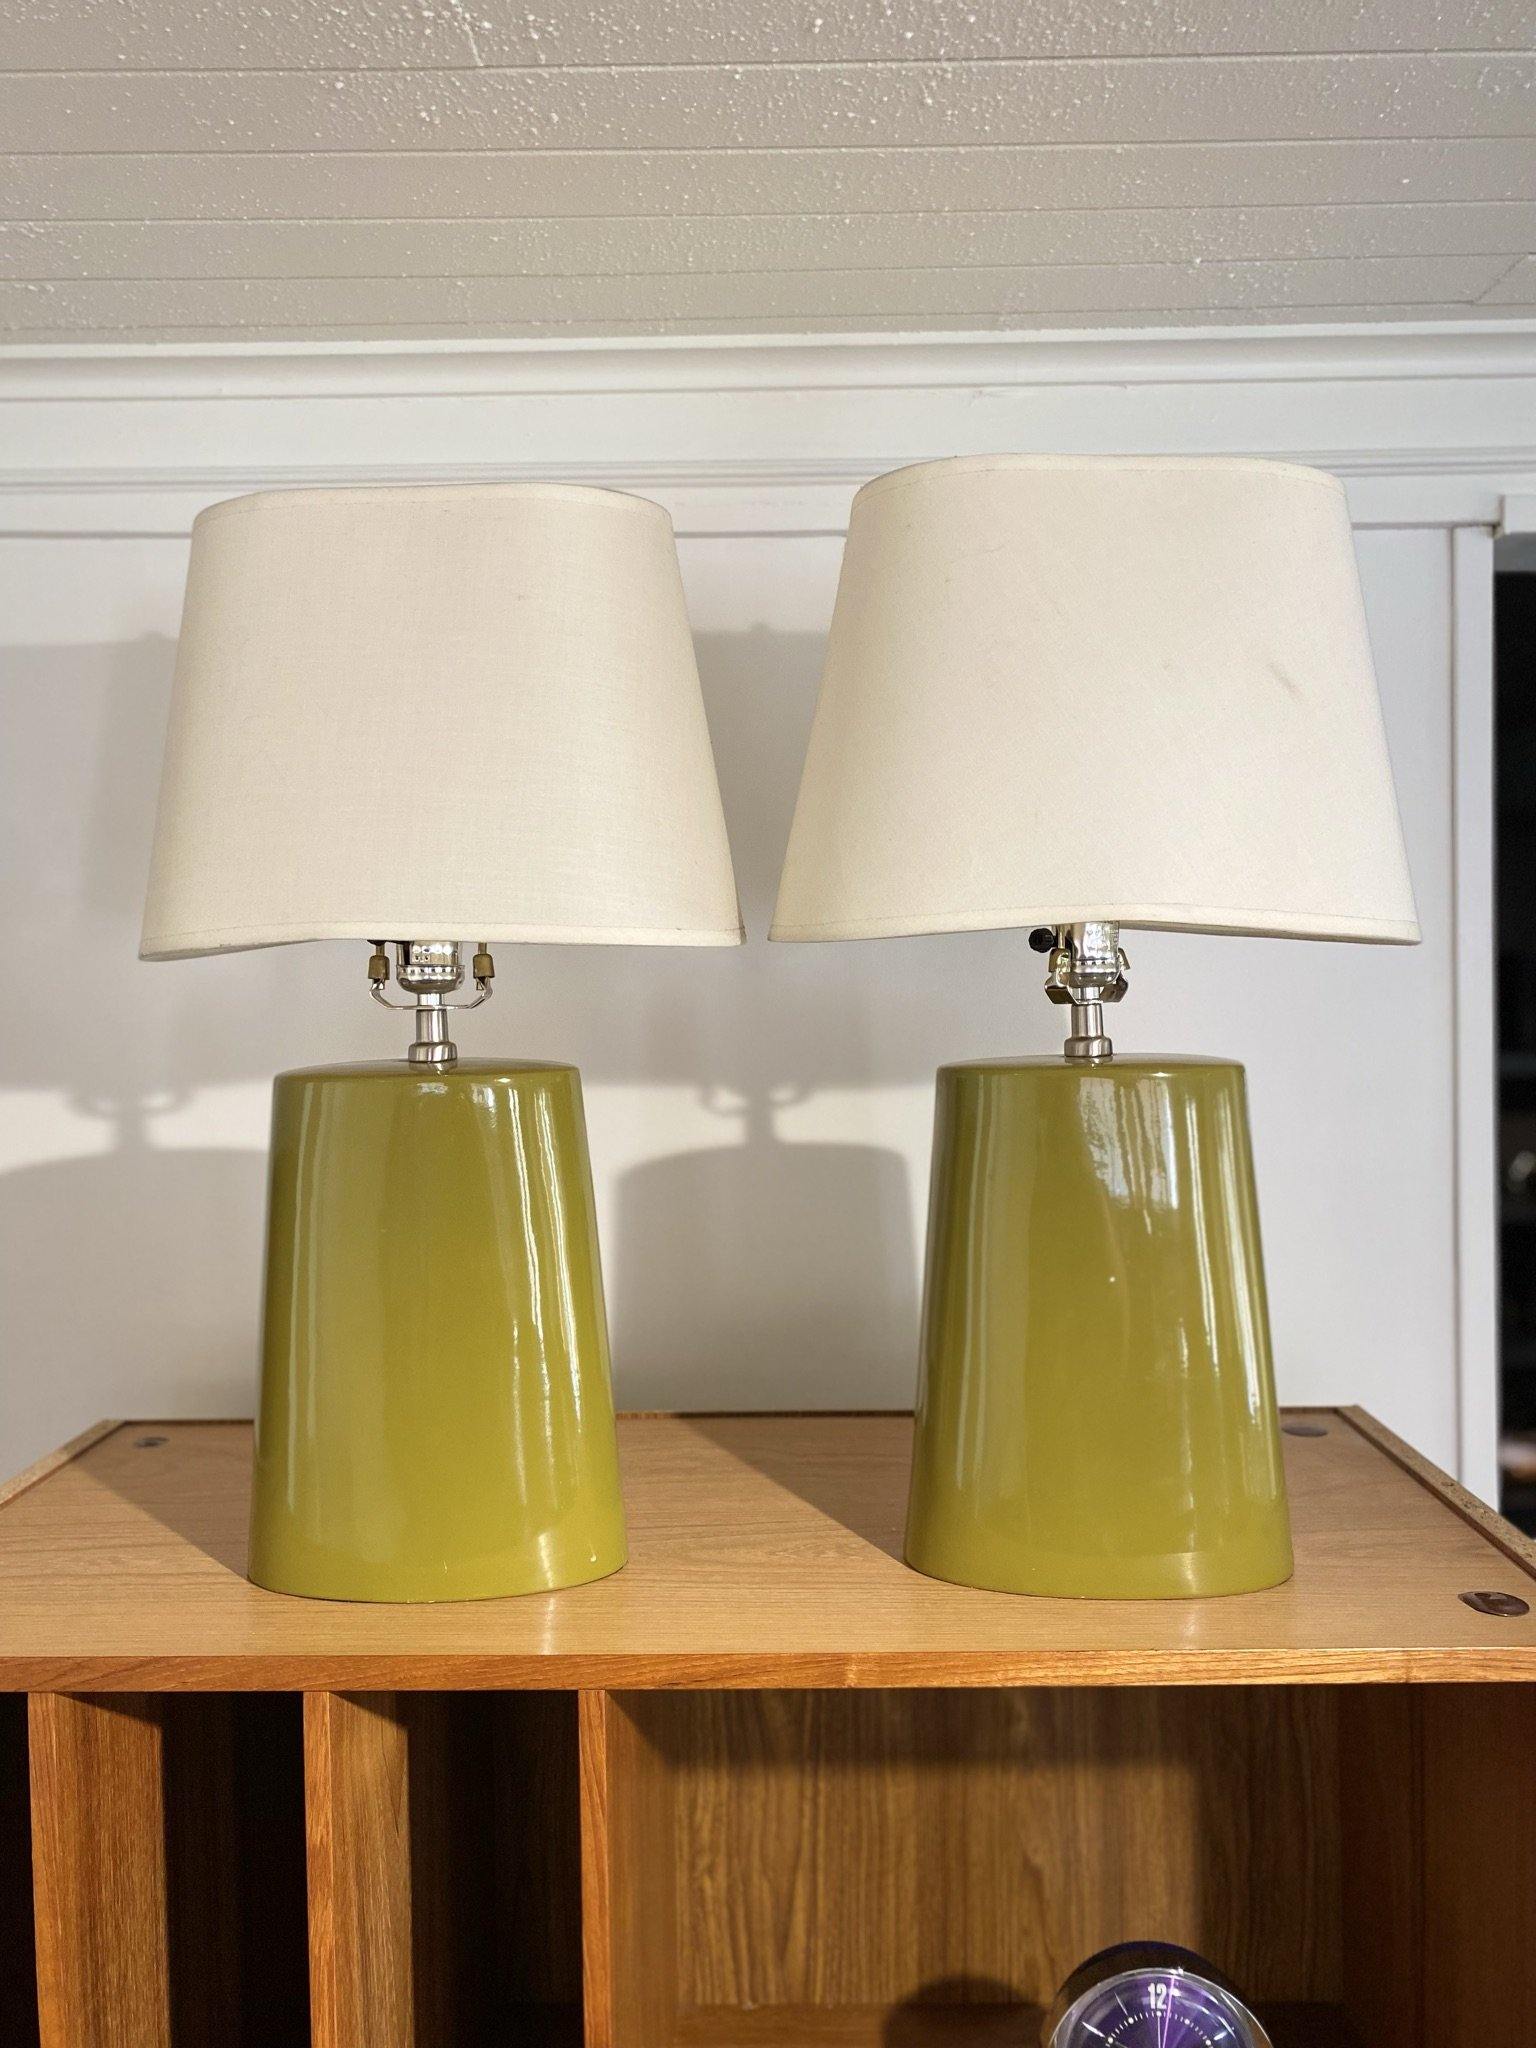 Two olive green lamps with white shades on top of teak table- Cook Street Vintage